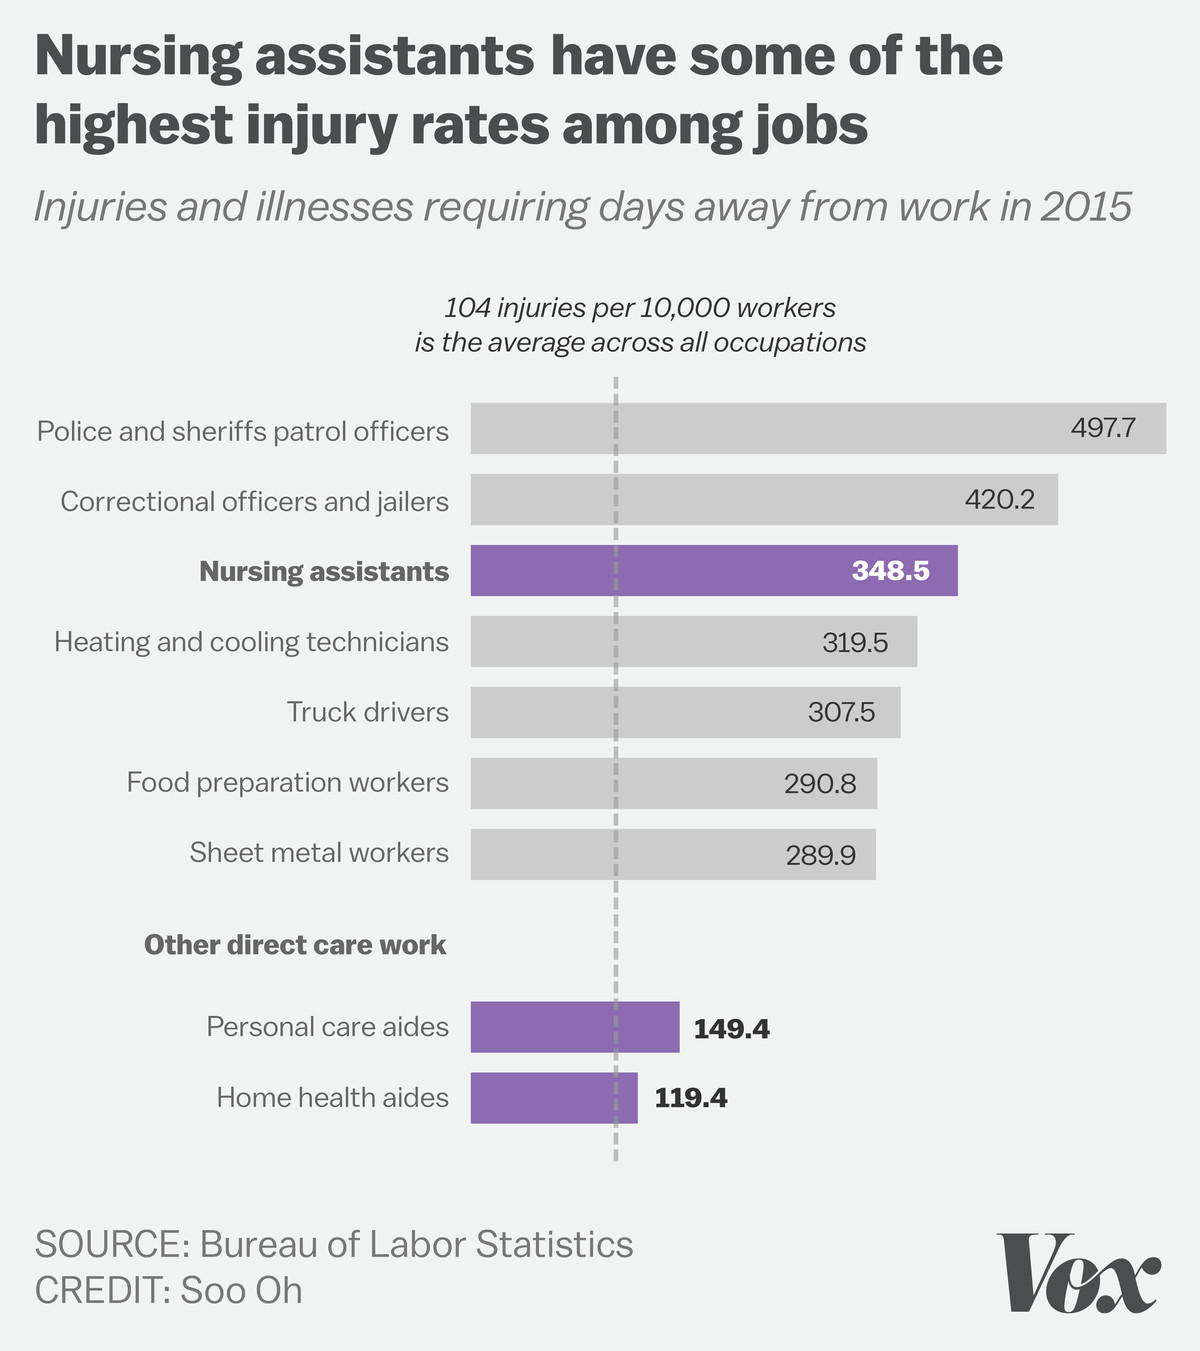 Nursing assistants have some of the highest injury rates among jobs